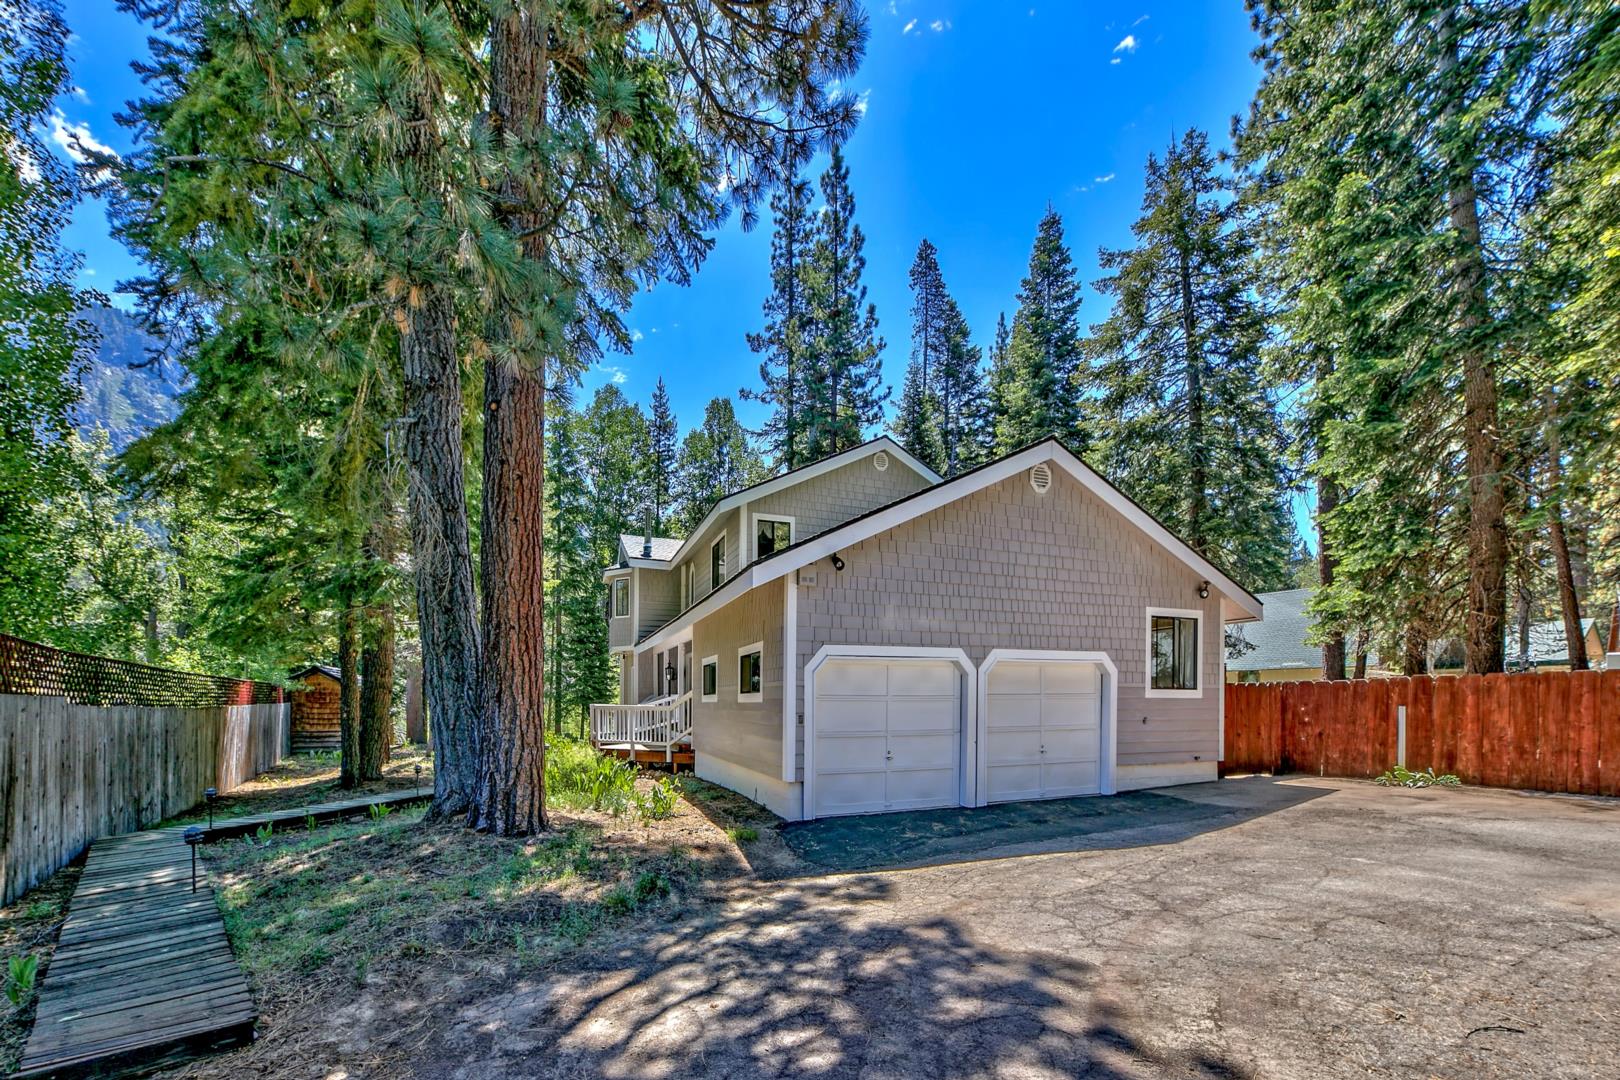 3685 S Upper Truckee Rd - Why you should love it